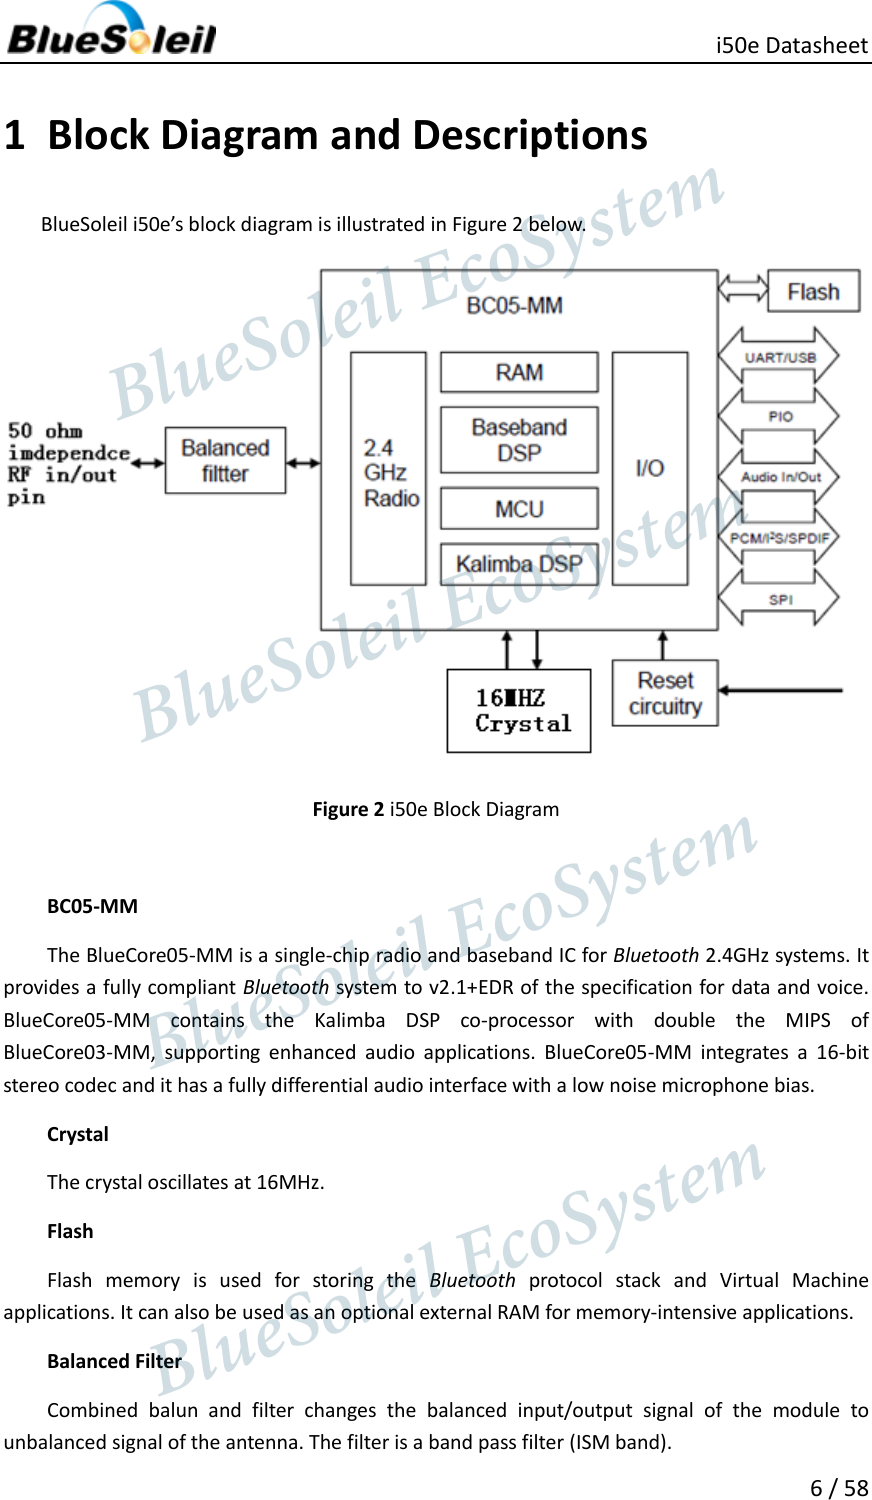     i50e Datasheet 6 / 58  1 Block Diagram and Descriptions BlueSoleil i50e’s block diagram is illustrated in Figure 2 below.  Figure 2 i50e Block Diagram  BC05-MM The BlueCore05-MM is a single-chip radio and baseband IC for Bluetooth 2.4GHz systems. It provides a fully compliant Bluetooth system to v2.1+EDR of the specification for data and voice. BlueCore05-MM  contains  the  Kalimba  DSP  co-processor  with  double  the  MIPS  of BlueCore03-MM,  supporting  enhanced  audio  applications.  BlueCore05-MM  integrates  a  16-bit stereo codec and it has a fully differential audio interface with a low noise microphone bias. Crystal The crystal oscillates at 16MHz. Flash Flash  memory  is  used  for  storing  the  Bluetooth  protocol  stack  and  Virtual  Machine applications. It can also be used as an optional external RAM for memory-intensive applications. Balanced Filter Combined  balun  and  filter  changes  the  balanced  input/output  signal  of  the  module  to unbalanced signal of the antenna. The filter is a band pass filter (ISM band).                  BlueSoleil EcoSystem            BlueSoleil EcoSystem      BlueSoleil EcoSystemBlueSoleil EcoSystem